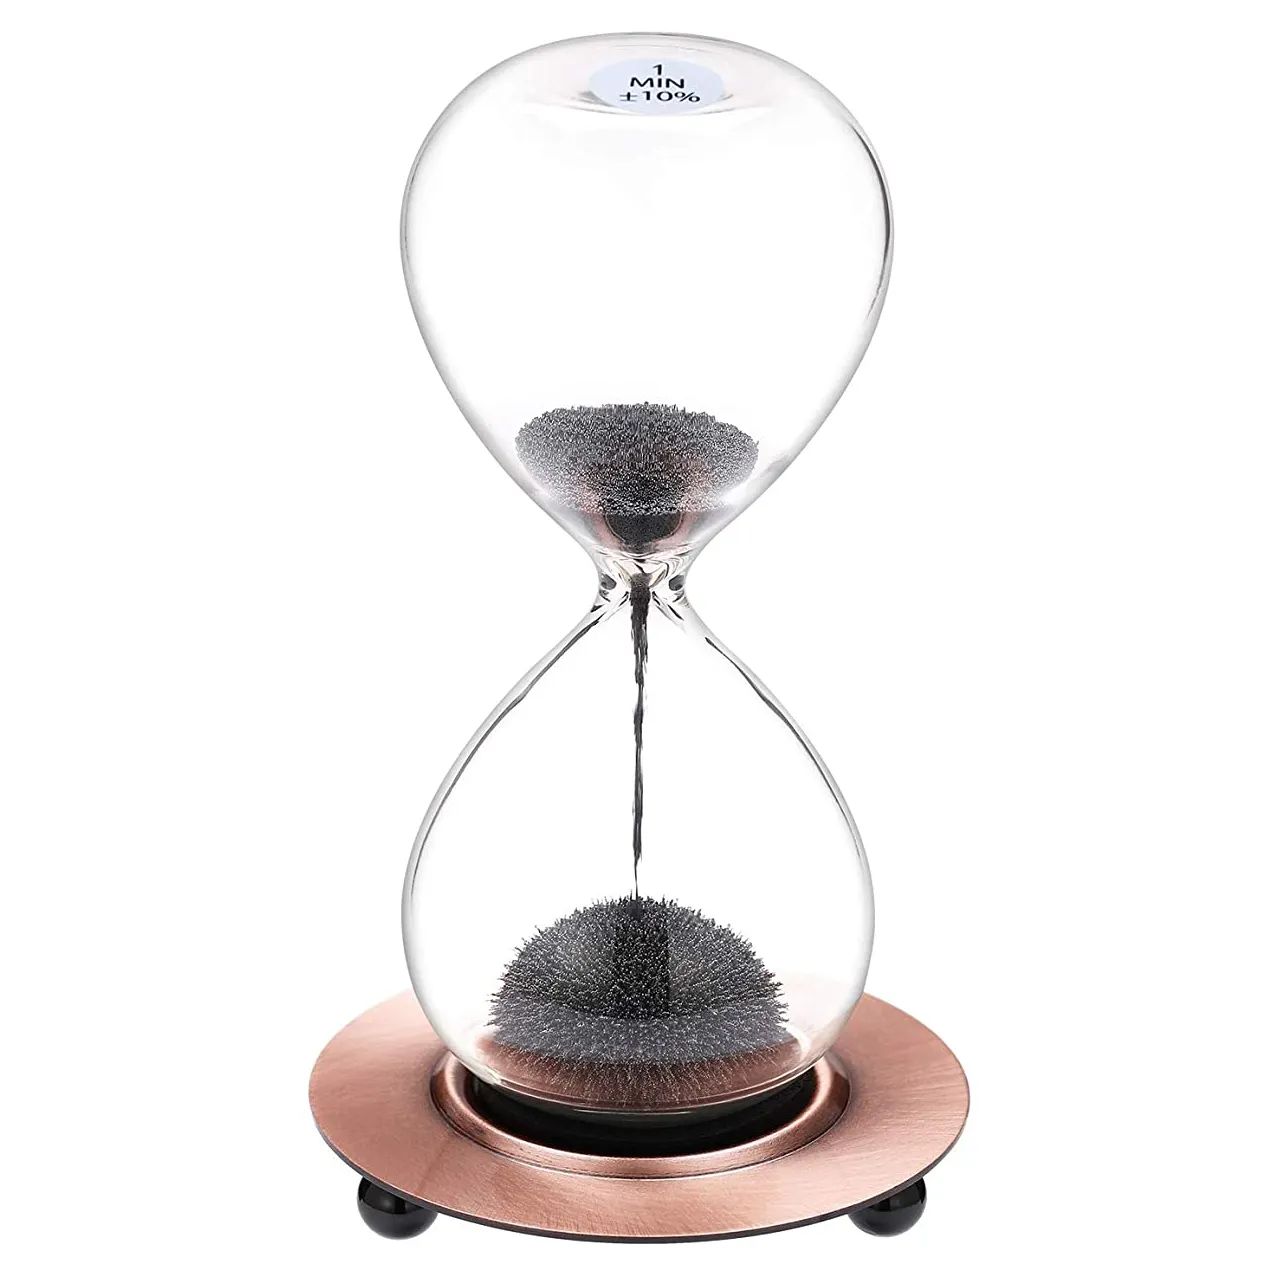 Magnetic Hourglass Magnet Iron Powder Sand Glass & Metal Base, Hand-blown Hour Glass for Desk Home Dec 1 Minute Sand Timer: Gray